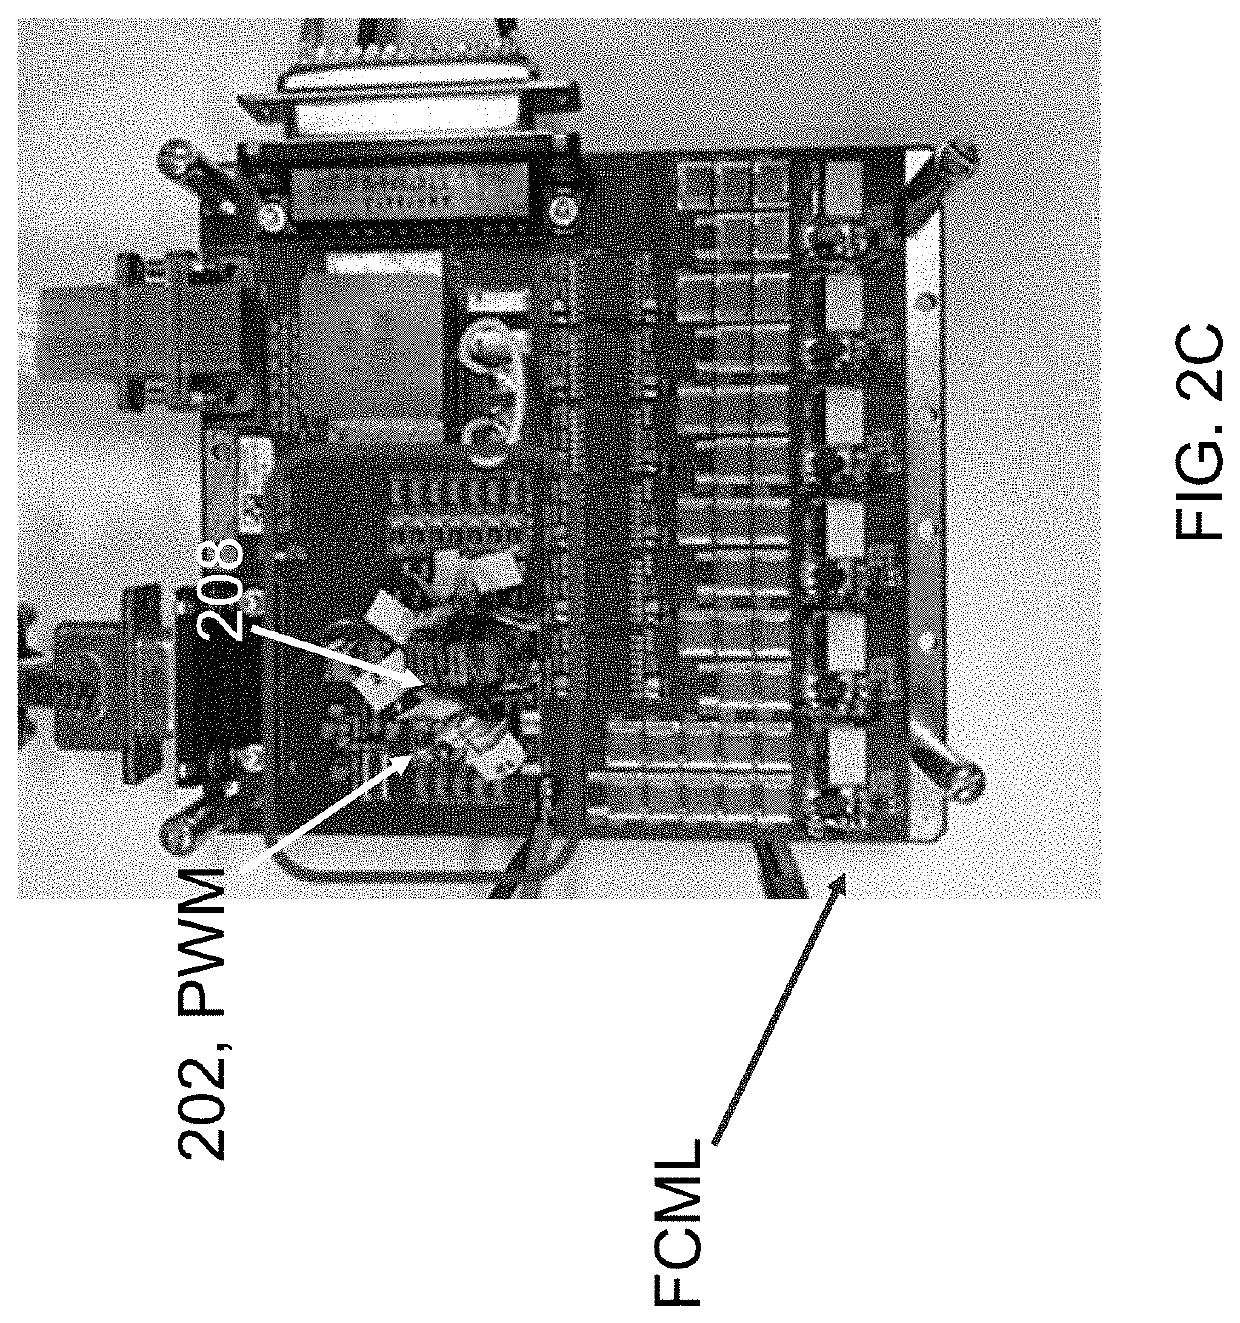 Flying capacitor multilevel converters for anode supplies in hall effect thrusters